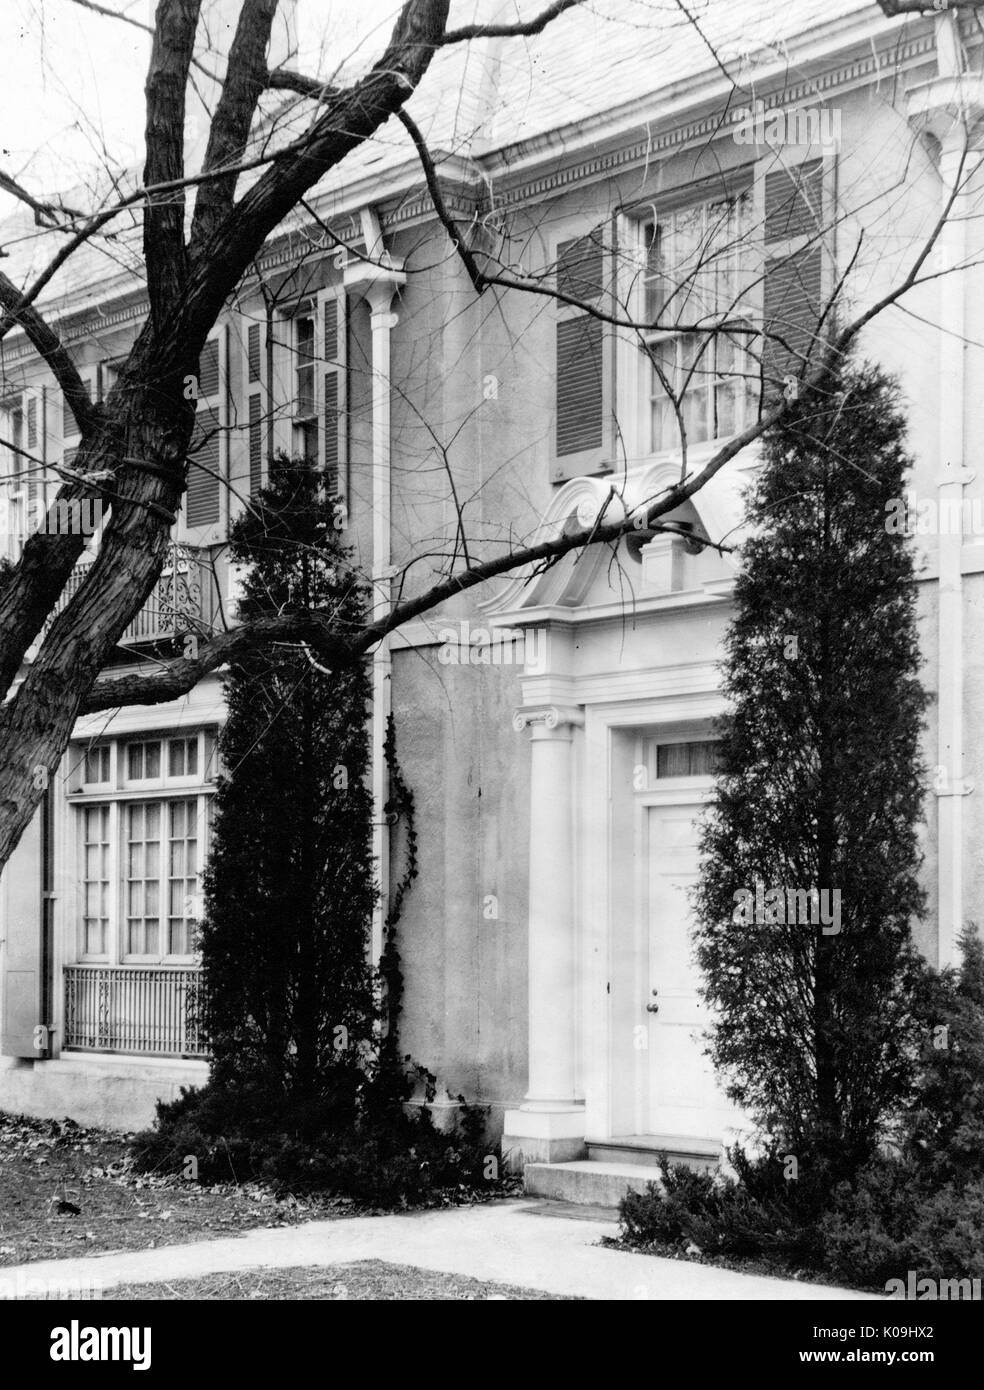 Picture of a facade of a Guilford home in Baltimore, with an ornate front door in between two large shrubs, a two-story home with large windows, Baltimore, Maryland, 1920. This image is from a series documenting the construction and sale of homes in the Roland Park/Guilford neighborhood of Baltimore, a streetcar suburb and one of the first planned communities in the United States. The neighborhood was segregated, and is considered an early example of the enforcement of racial segregation through the use of restricted covenants. Stock Photo